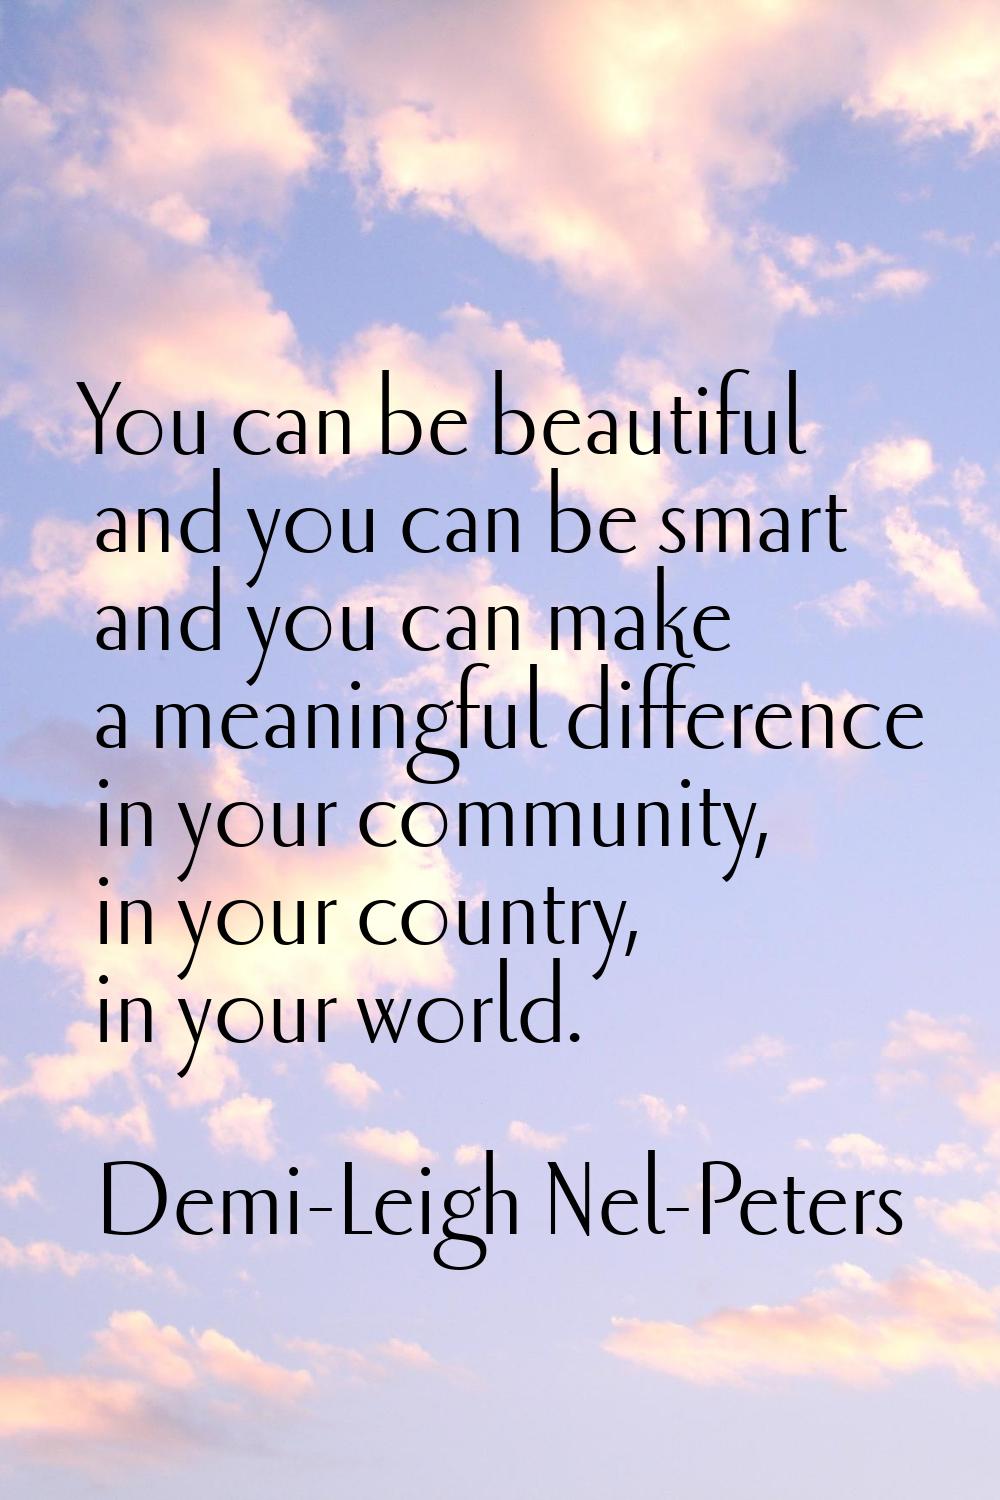 You can be beautiful and you can be smart and you can make a meaningful difference in your communit